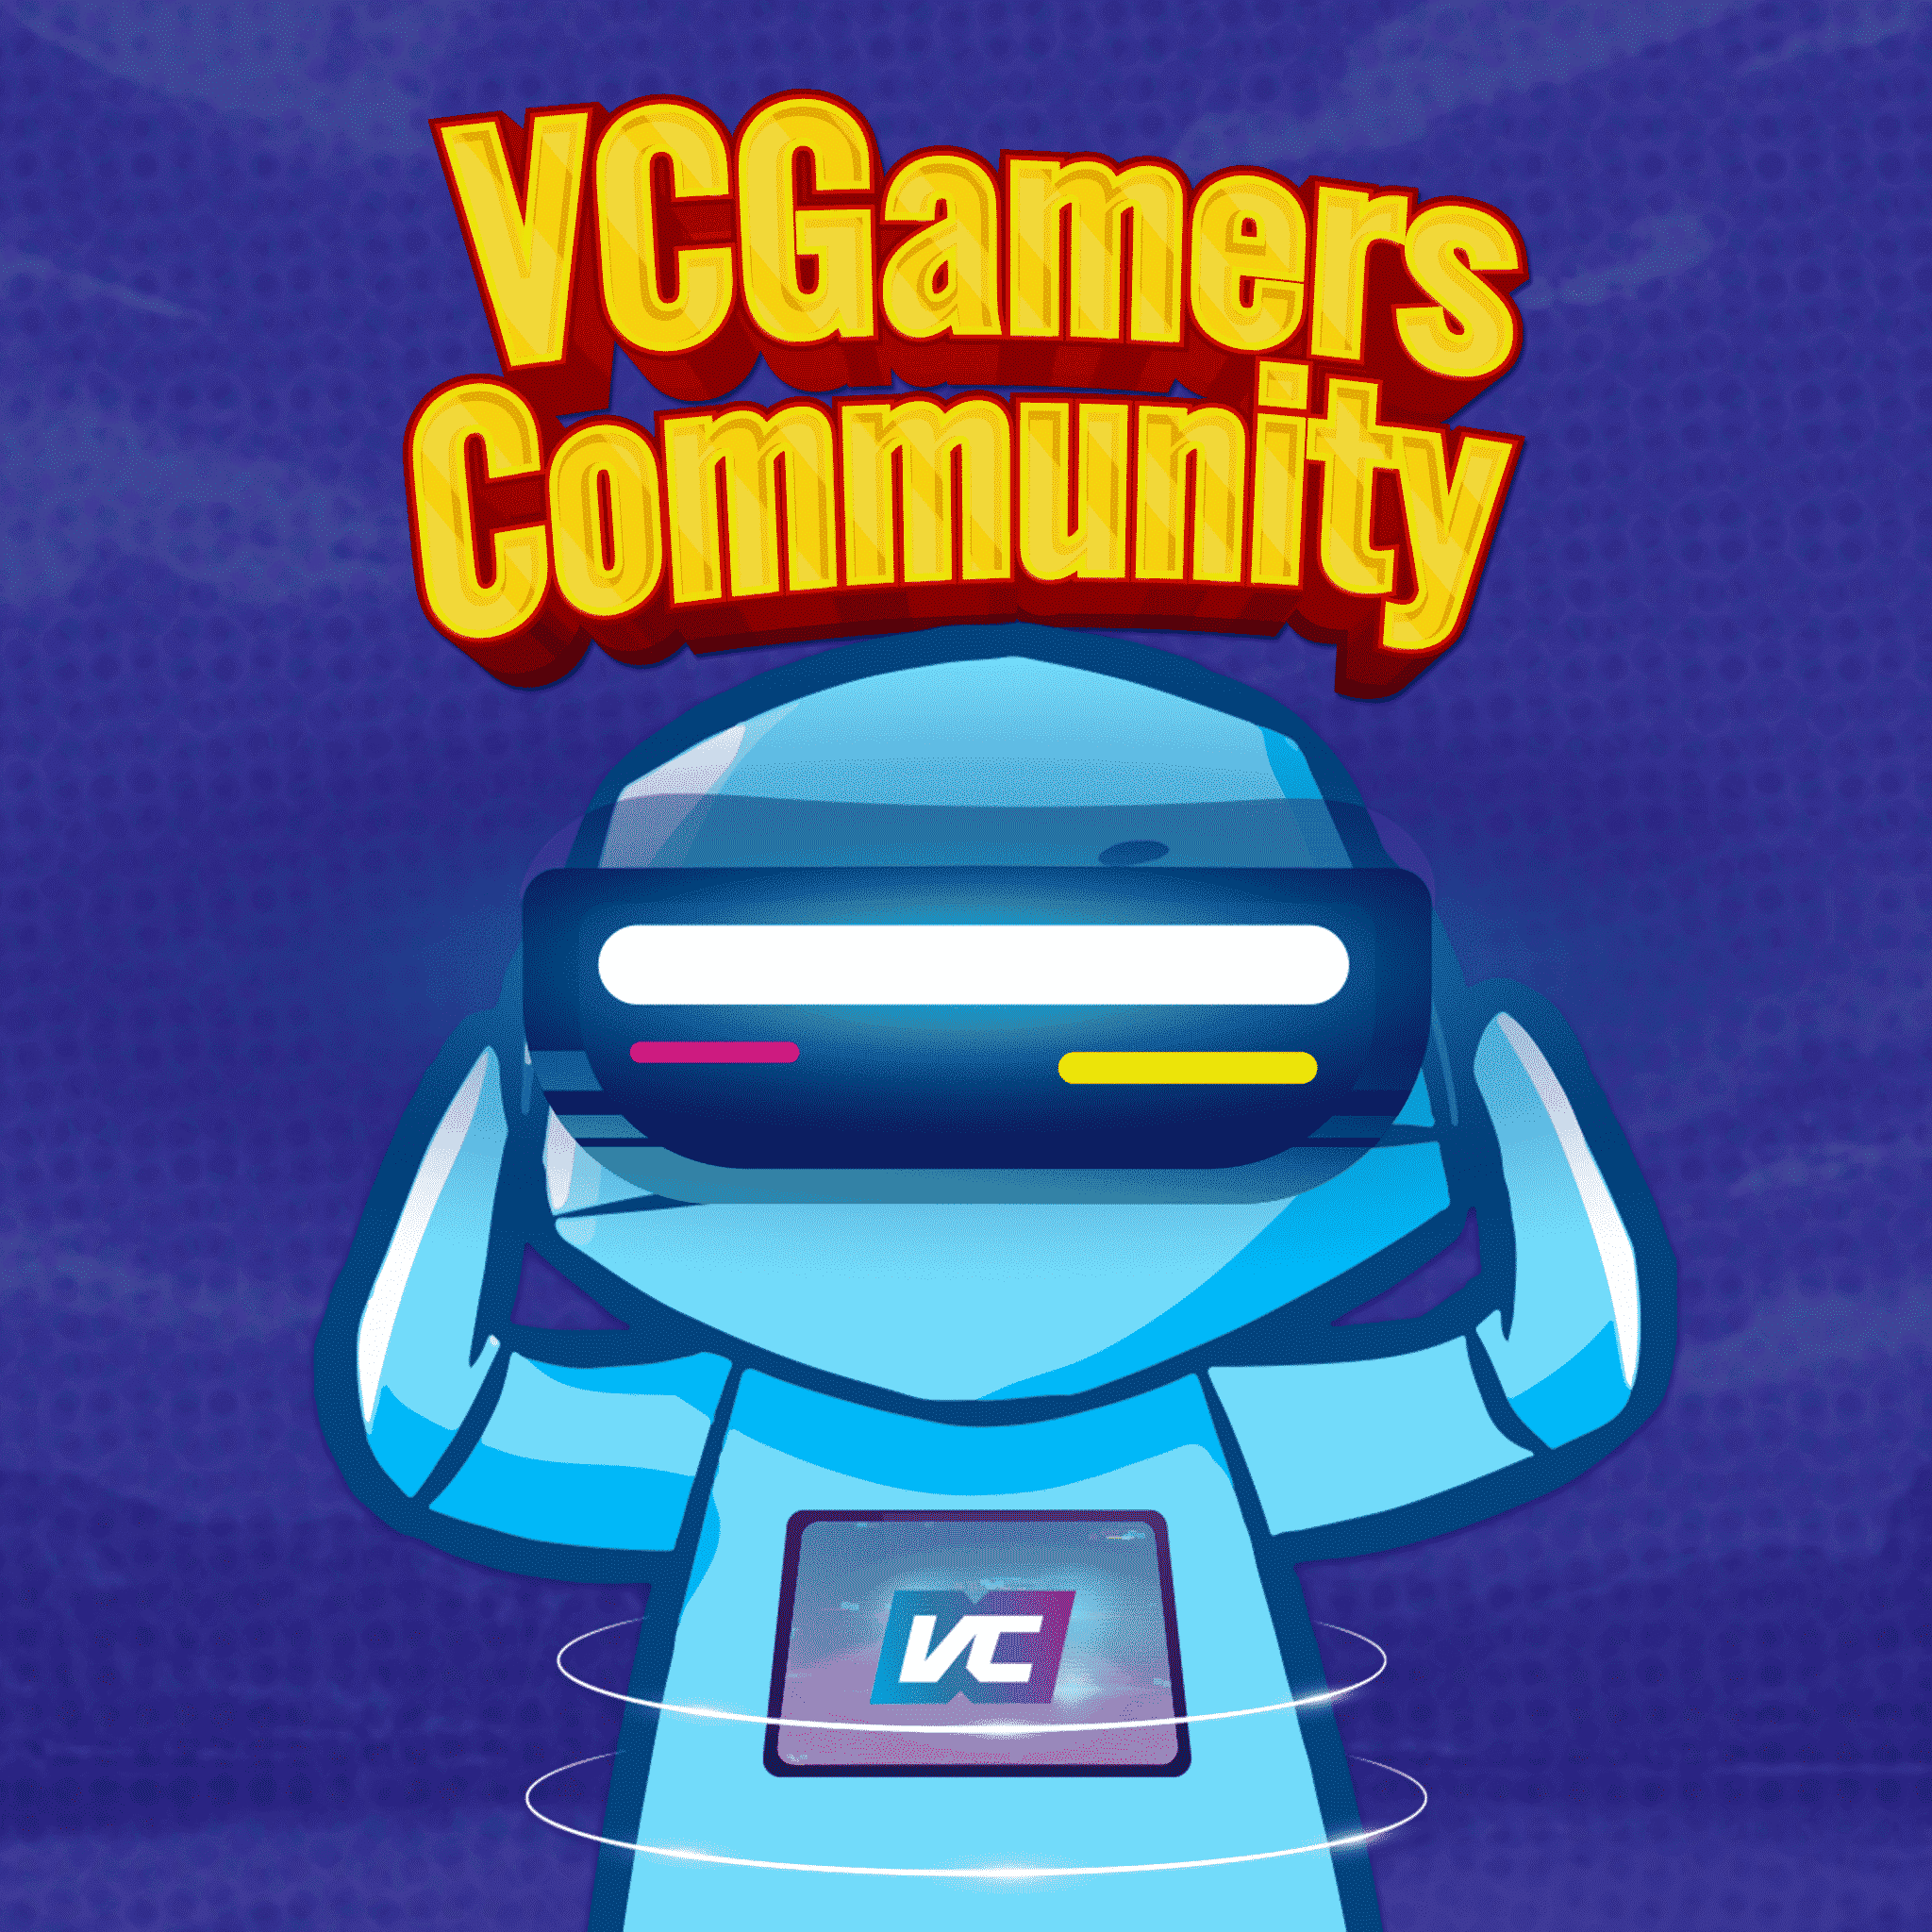 vcgamers社区